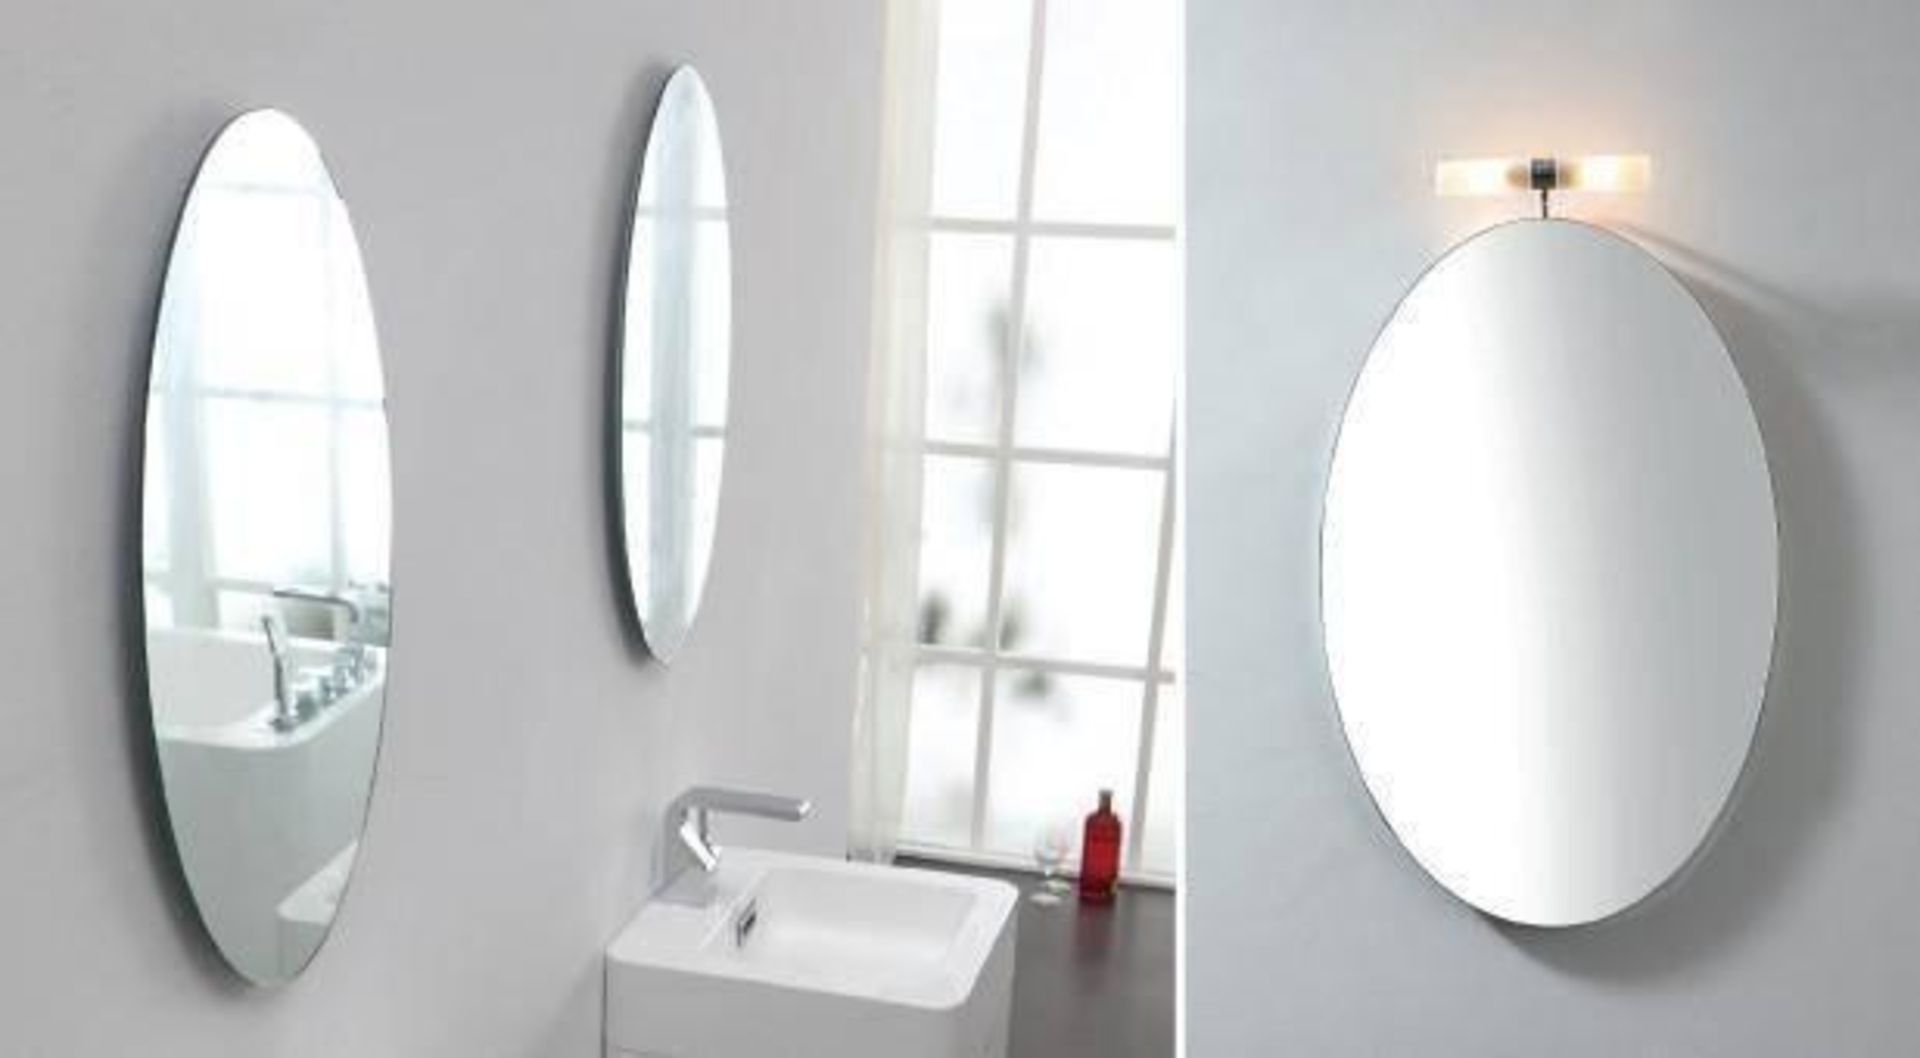 1 x Stylish Bathroom Oval Mirror 45 with top light - A-Grade - Ref:AMR14-045 - CL170 - Location: Not - Image 4 of 4